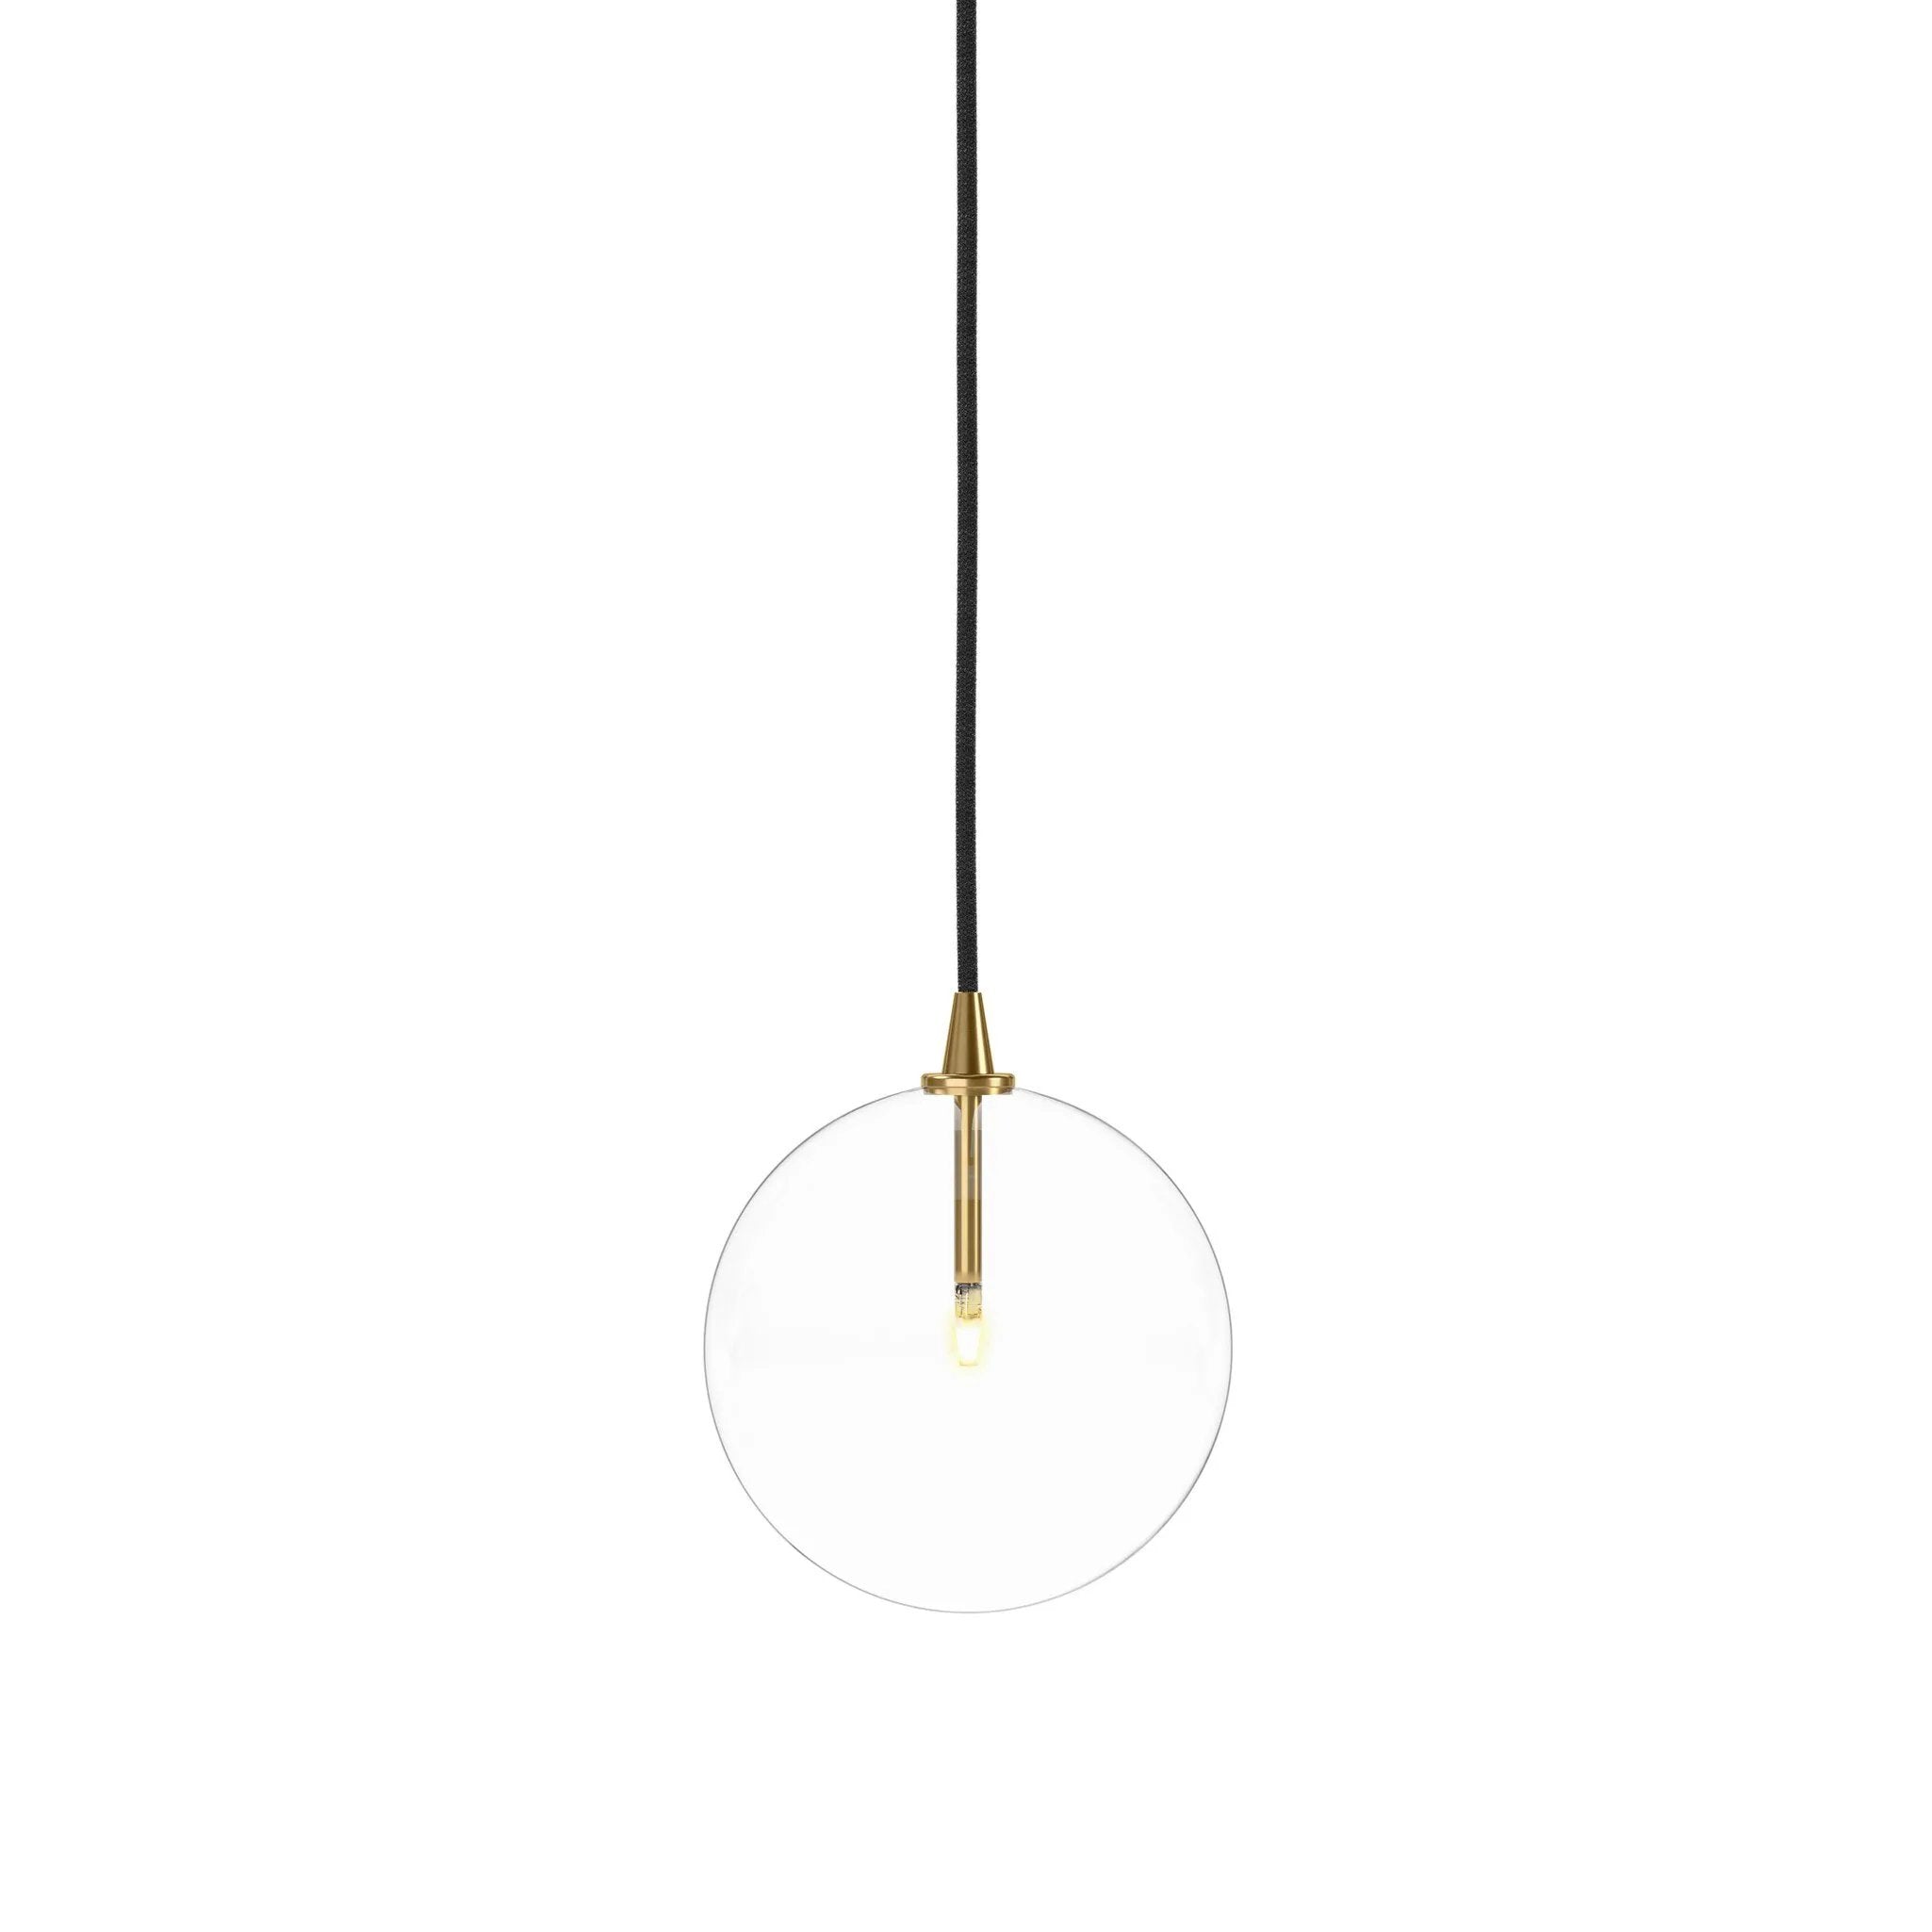 A single glass sphere dangles for a stunning effect. Each globe is individually blown, shaped and sculpted by hand through a one-hour process. Brass and glass are 98% recyclable. Designed and sustainably crafted in Poland by Schwung.Overall Dimensions7.75"w x 7.75"d x 15.25"hFull Details &amp; SpecificationsTear Shee Amethyst Home provides interior design, new home construction design consulting, vintage area rugs, and lighting in the Laguna Beach metro area.